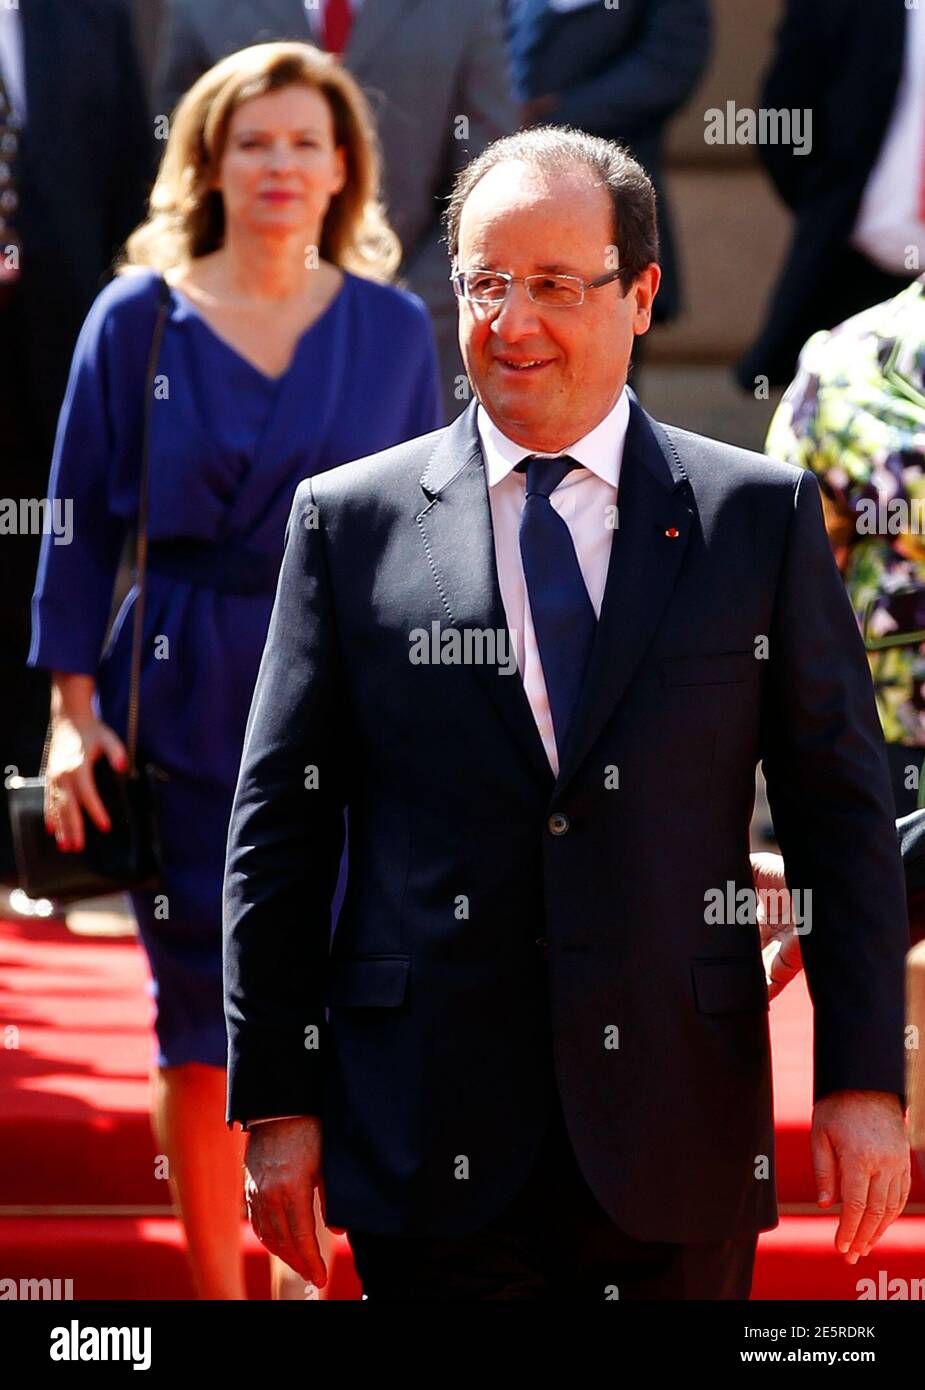 French President Francois Hollande looks on as he is followed by his wife Valerie Trierweiler at the Union building in Pretoria October 14, 2013. France will lend 100 million euros ($135 million) to South African state power utility Eskom to help it finance solar power projects in Africa's largest economy, according to a communique obtained by Reuters on Monday. The deal will be signed as a part of a summit between Hollande and South Africa's President Jacob Zuma, which started on Monday in Pretoria. Reuters/Siphiwe Sibeko (SOUTH AFRICA - Tags: POLITICS BUSINESS ENERGY) Stock Photo